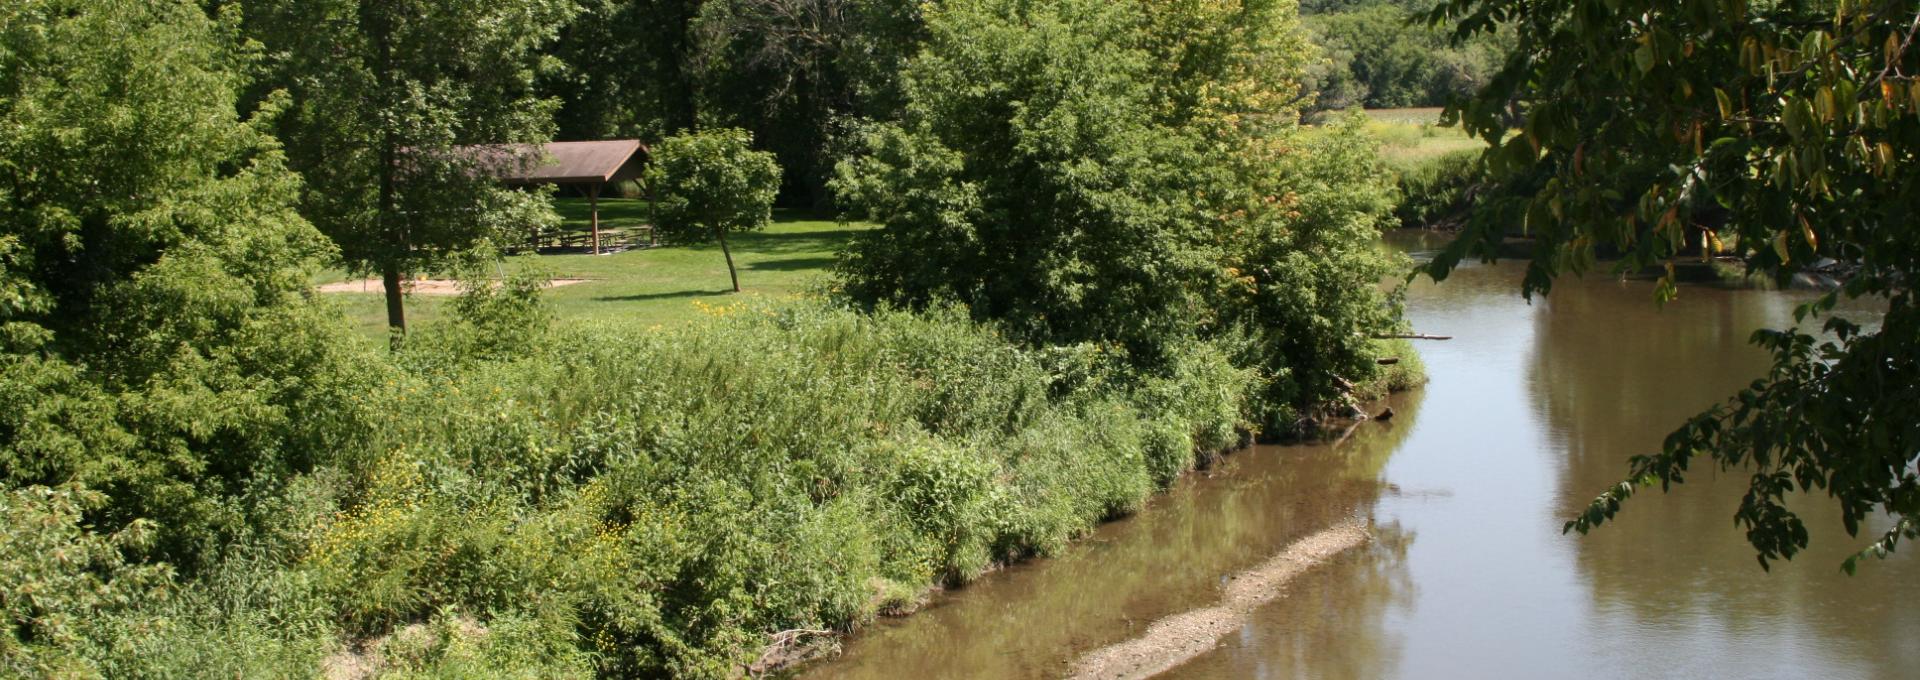 A river in the summer with a grassy area for recreational activities